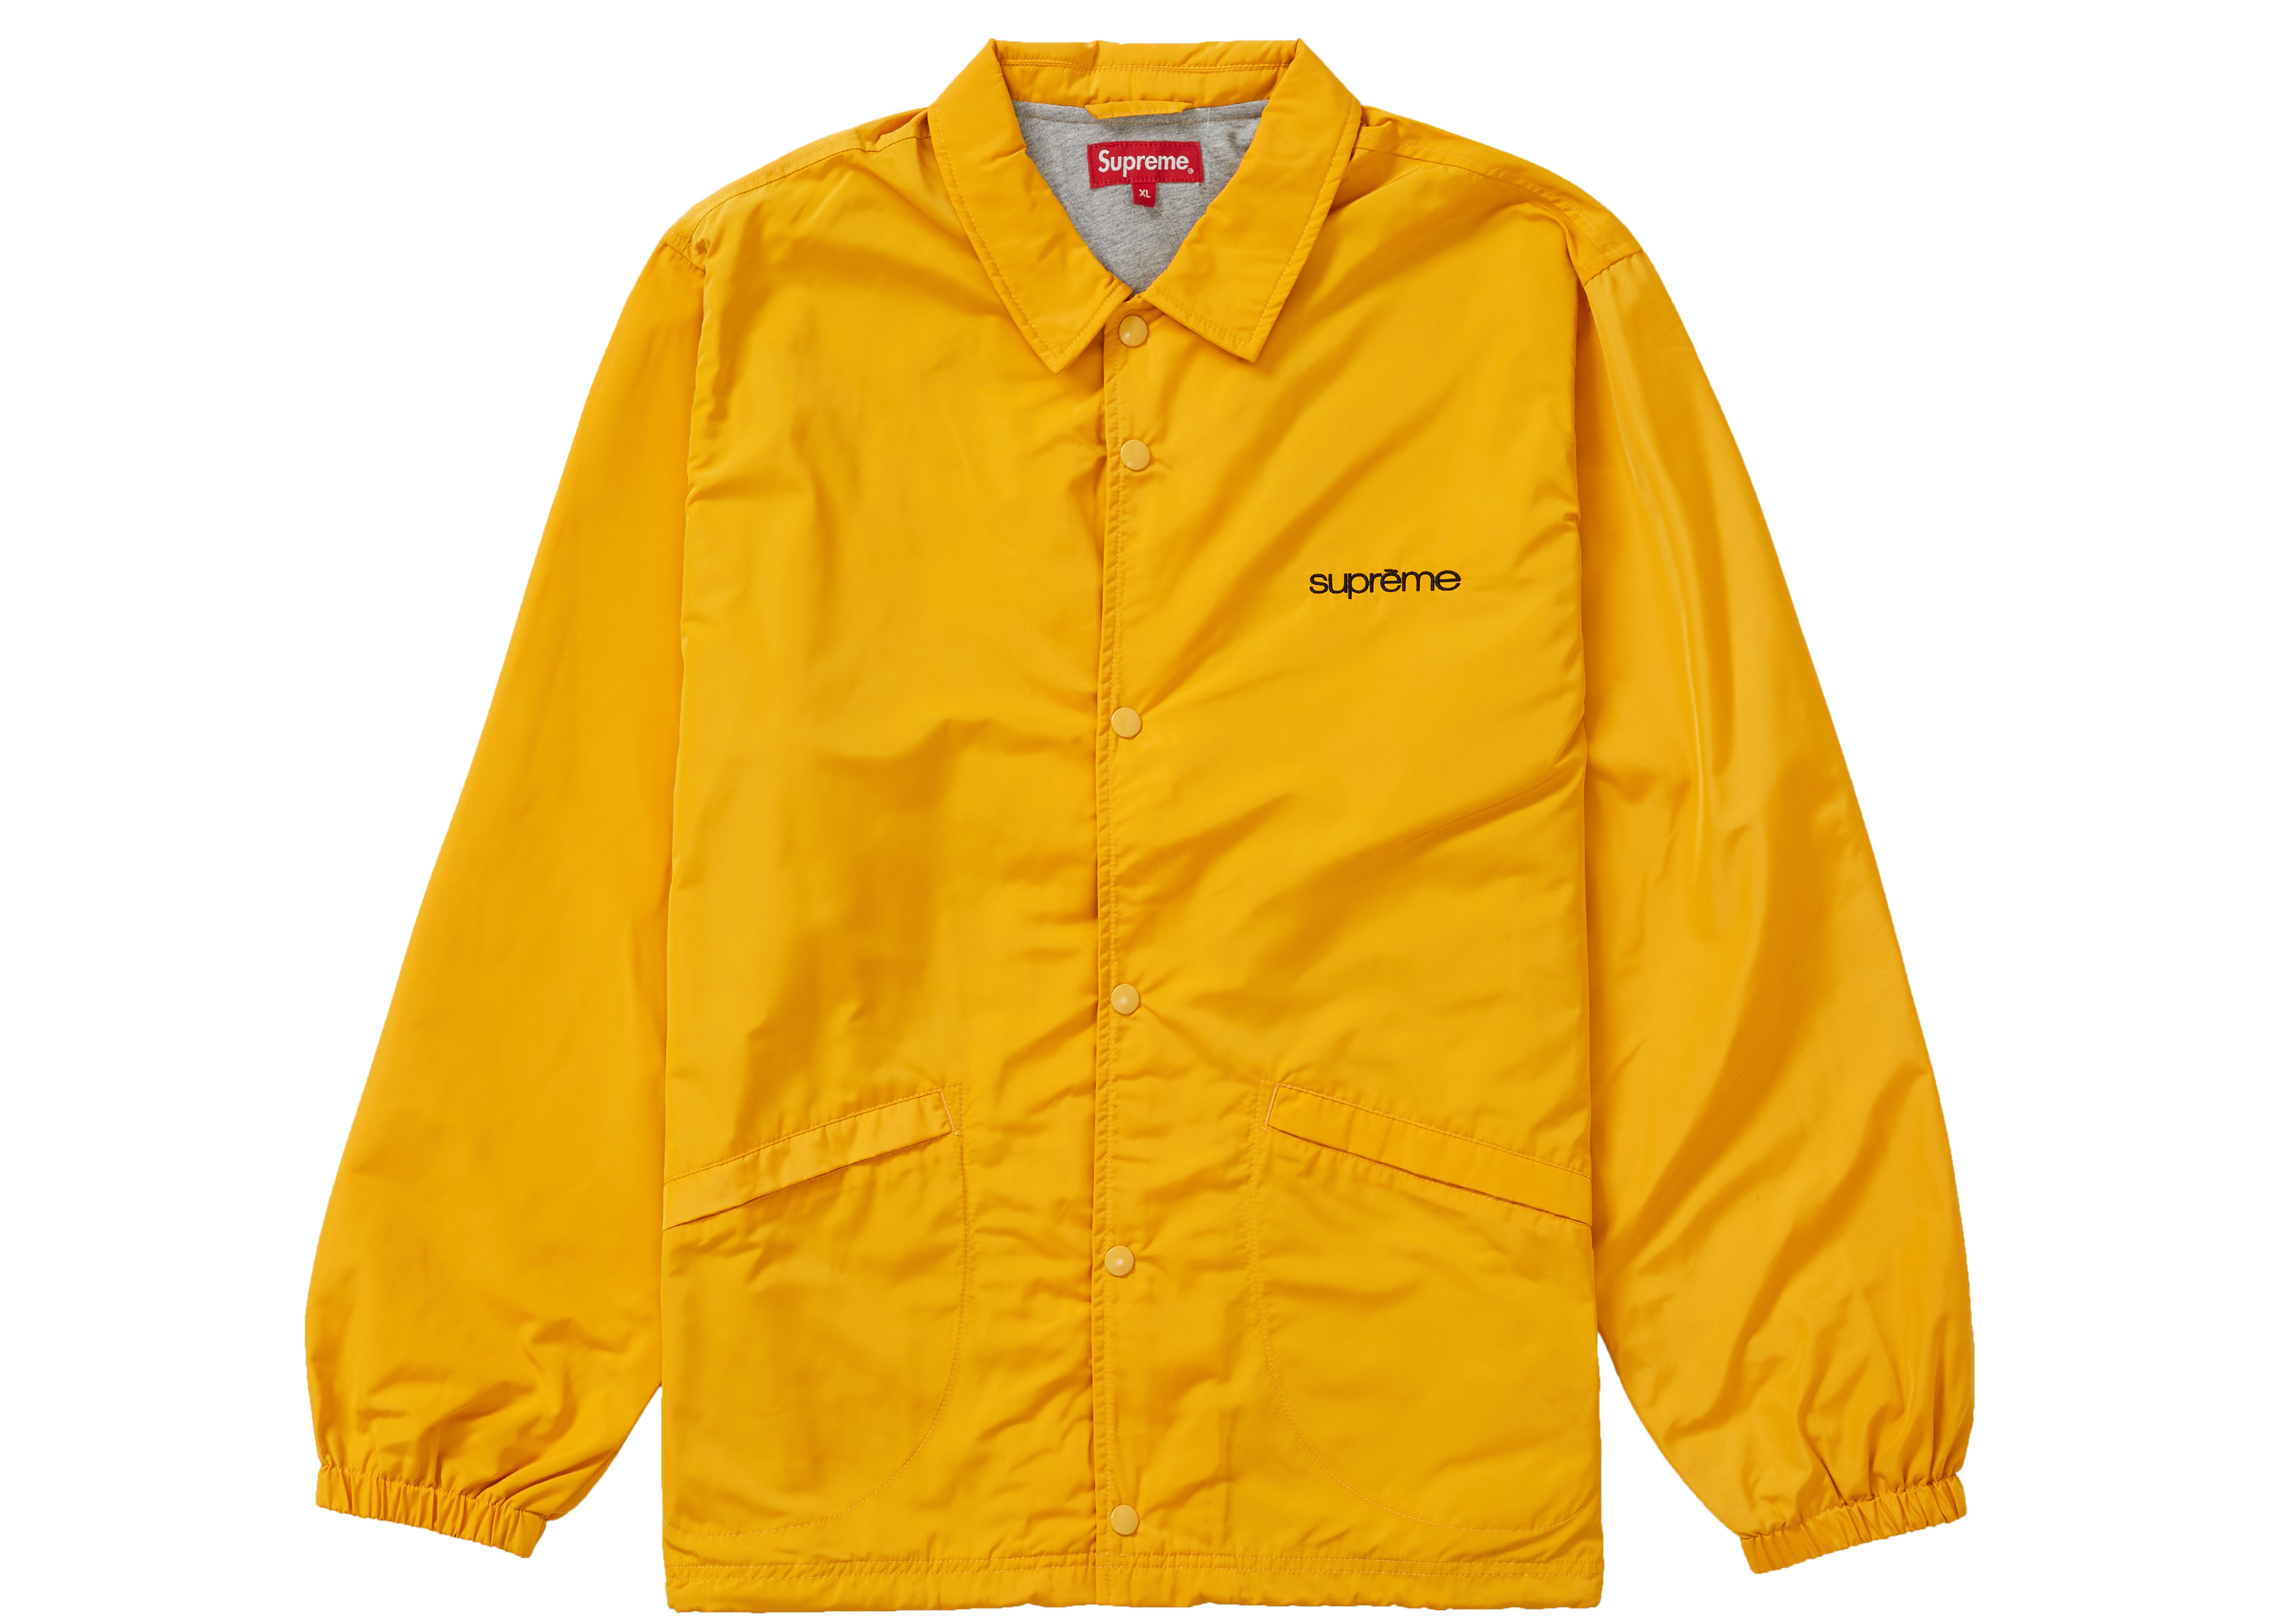 Supreme Gummo Coaches Jacket Red - SS22 Men's - US